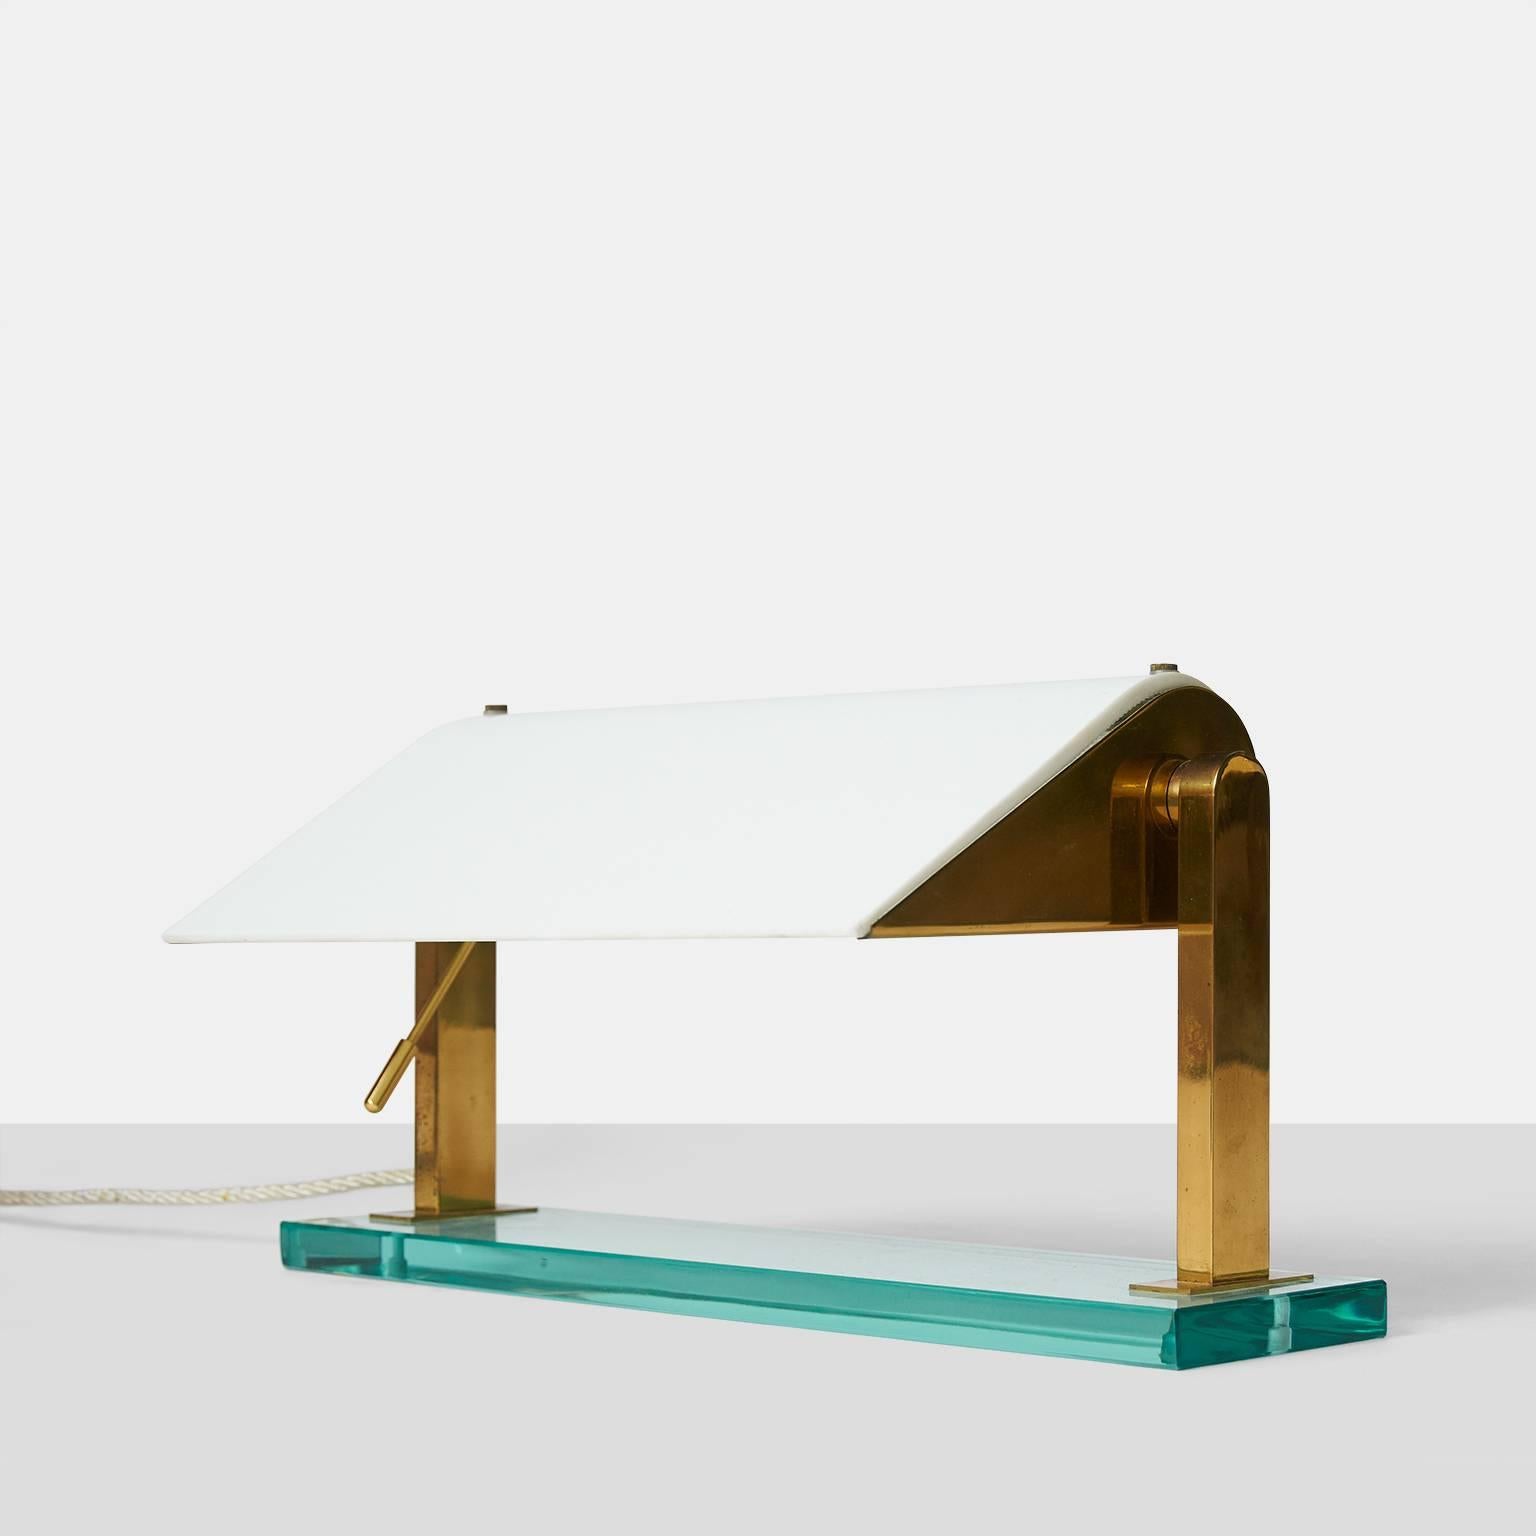 A Classic and contemporary shaped 1940s table lamp by Pietro Chiesa for Fontana Arte. Made with the typical Fontana Arte green glass base, a brass frame, and curved white glass diffuser. The shade's angle can be adjusted by using the brass arm.